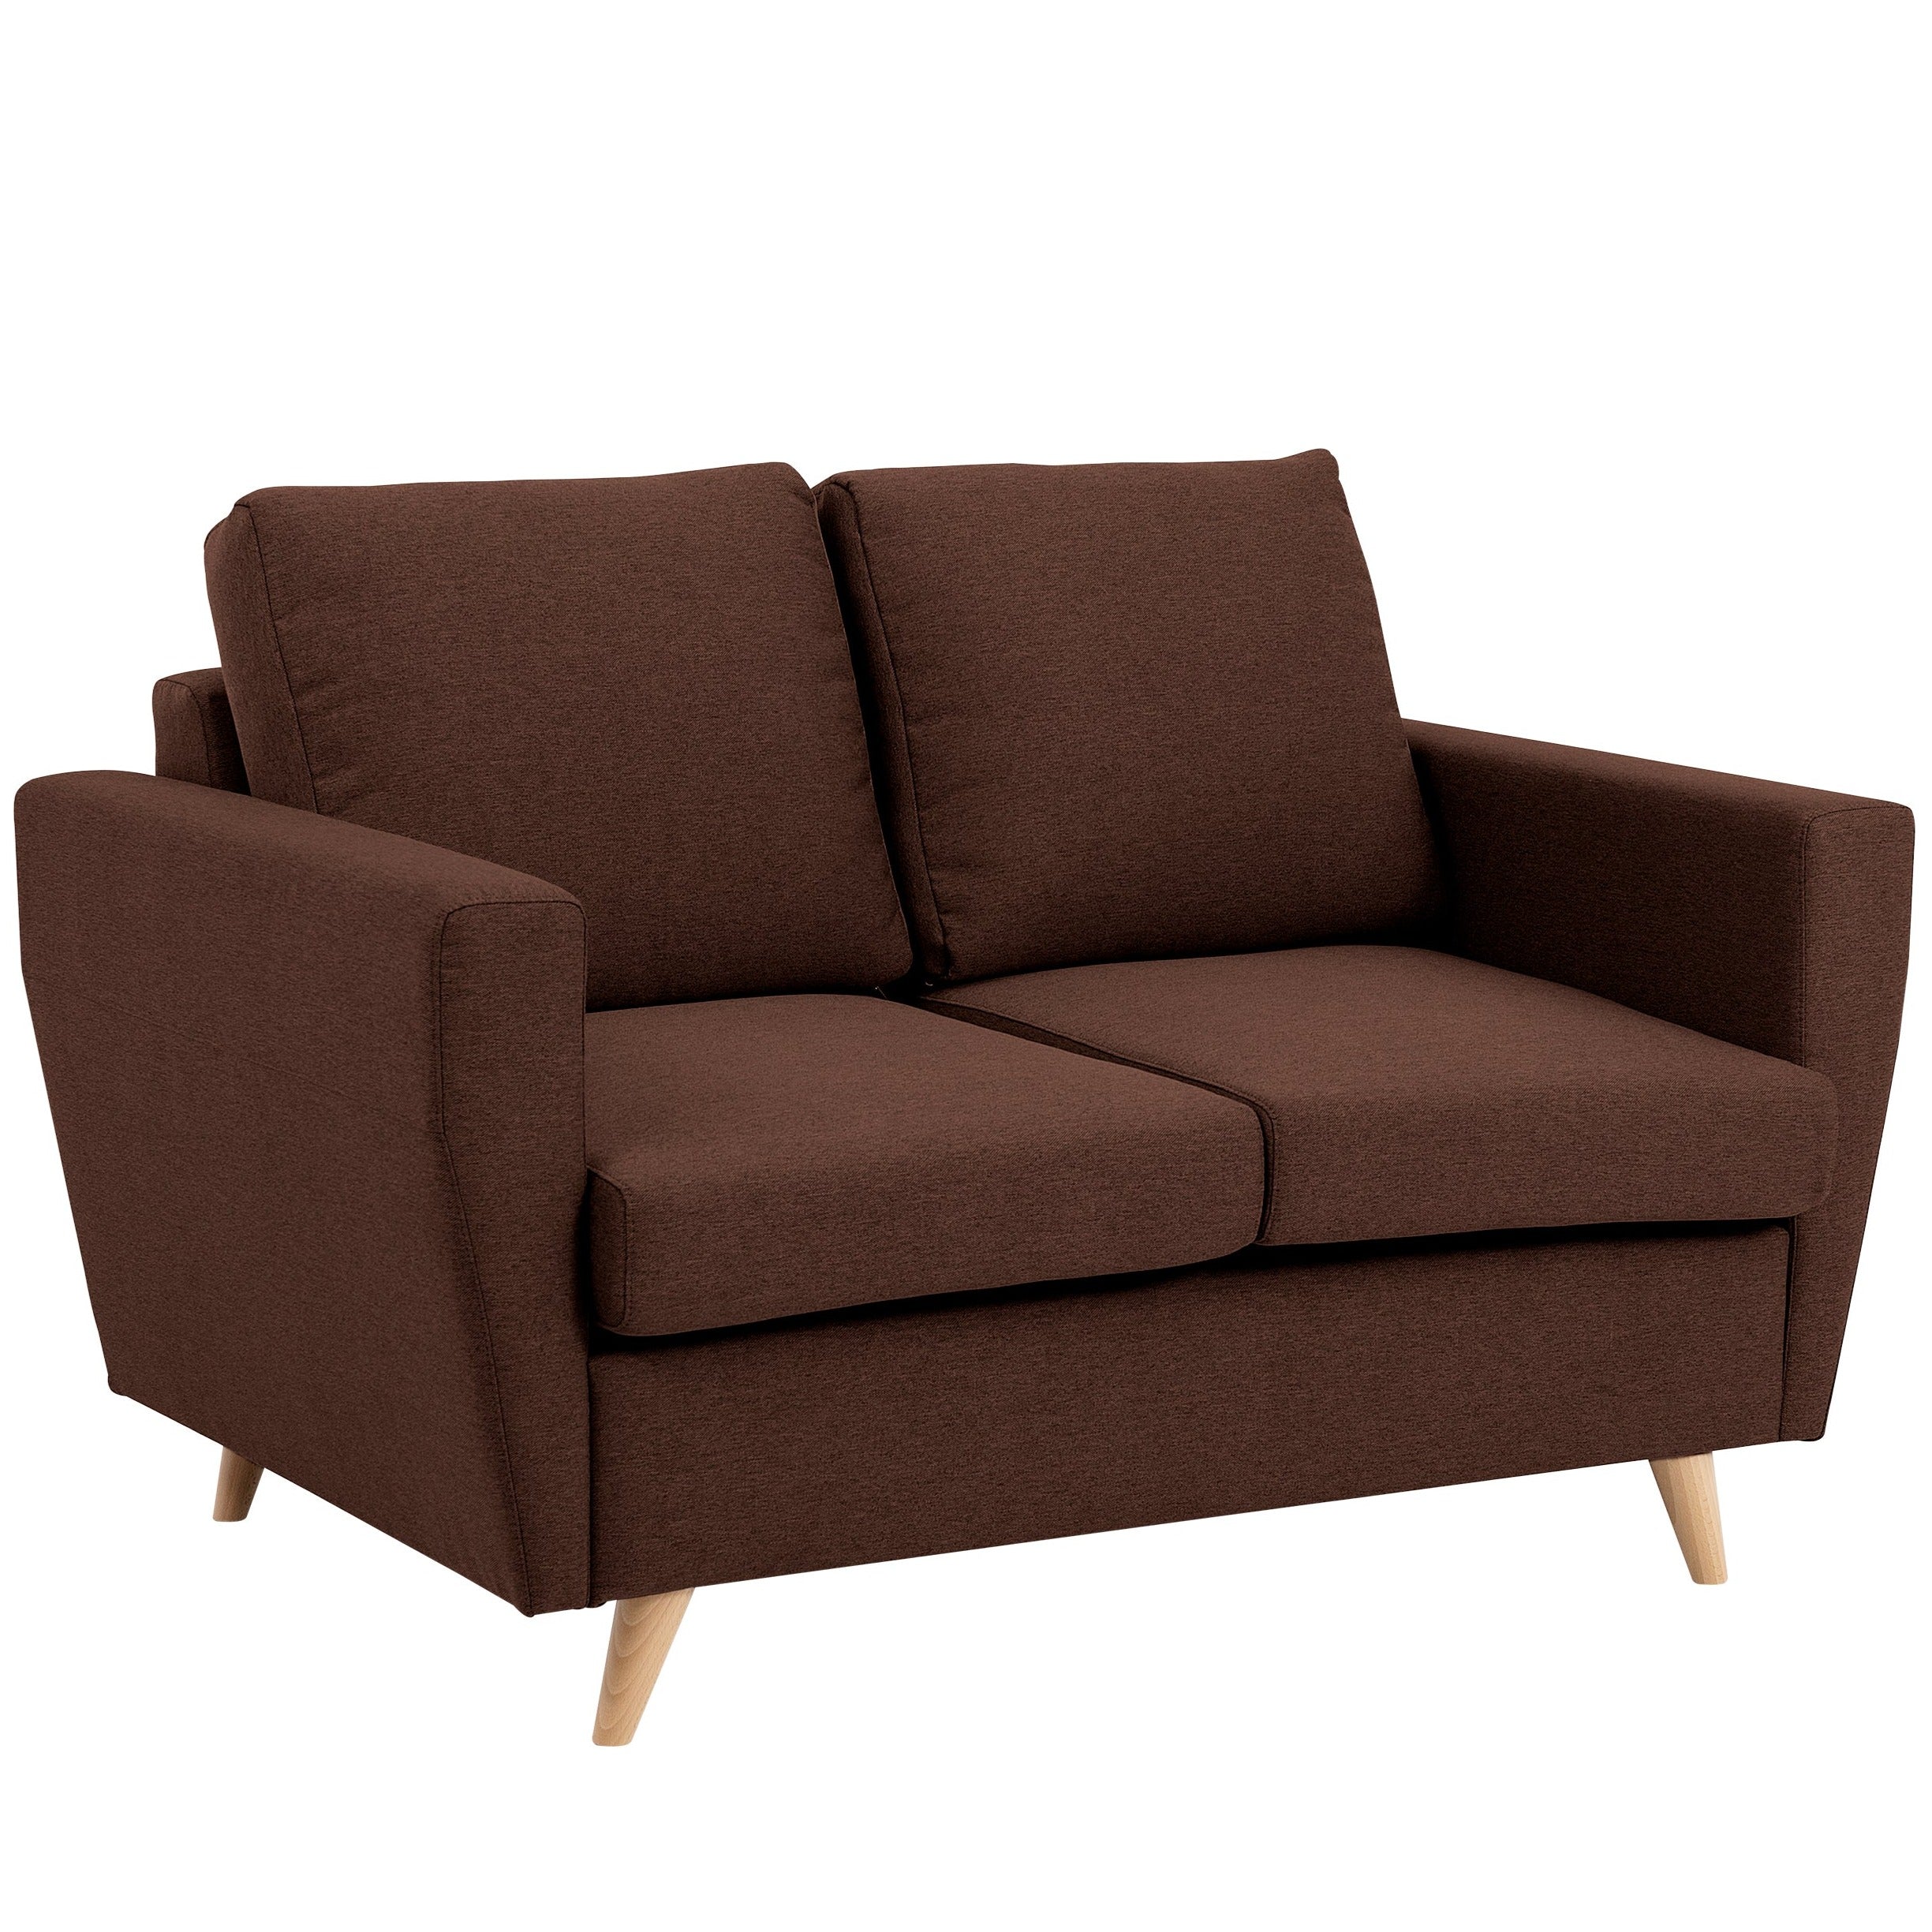 LOVER Sofa upholstery colour-brown 2 seats